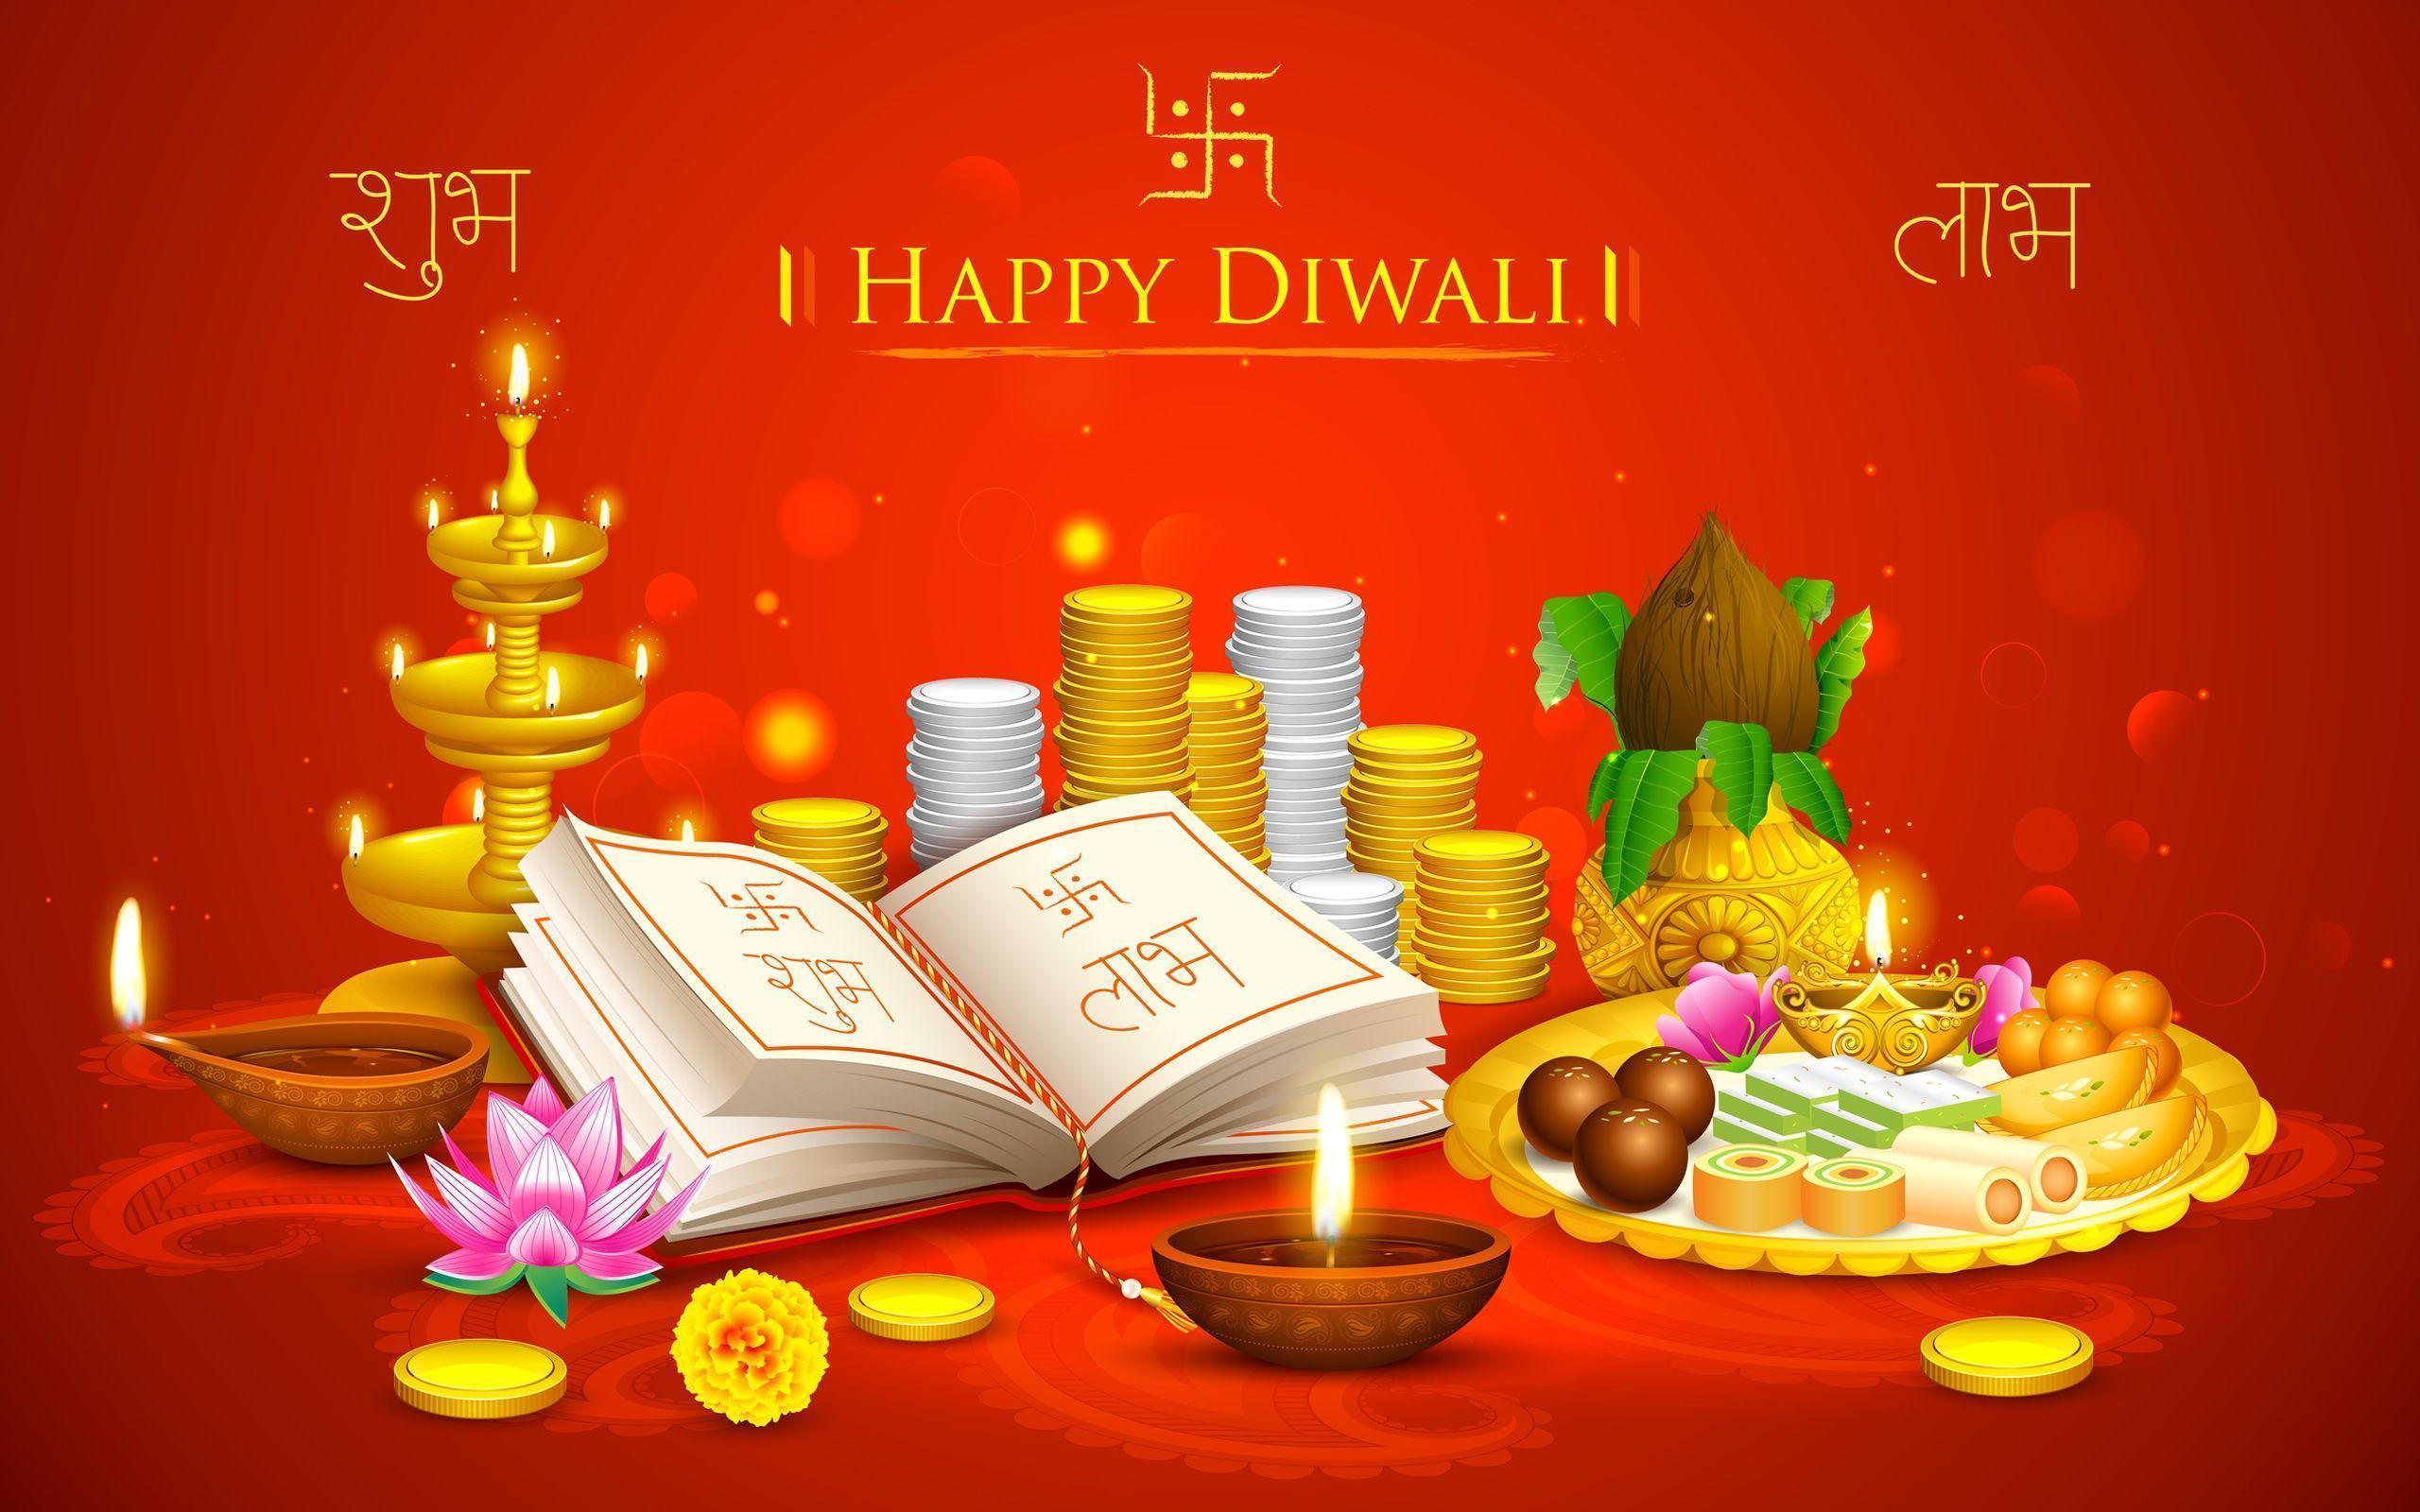 Wallpaper Happy Diwali, Indian festivals, HD, Celebrations,. Wallpaper for iPhone, Android, Mobile and Desktop